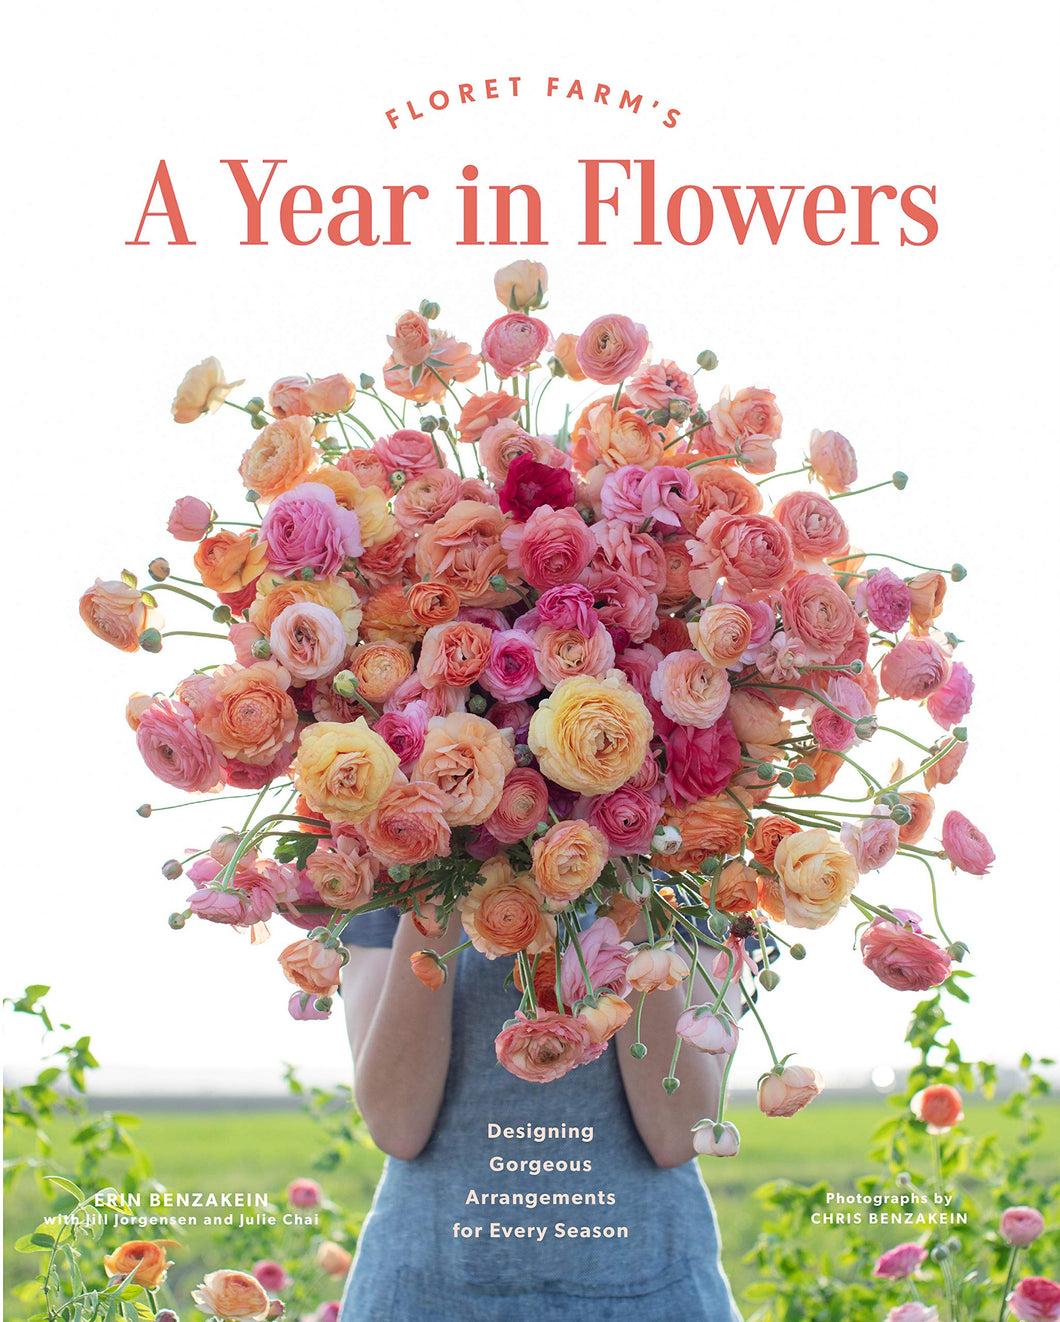 Floret Farm’s A Year in Flowers: Designing Gorgeous Arrangements for Every Season